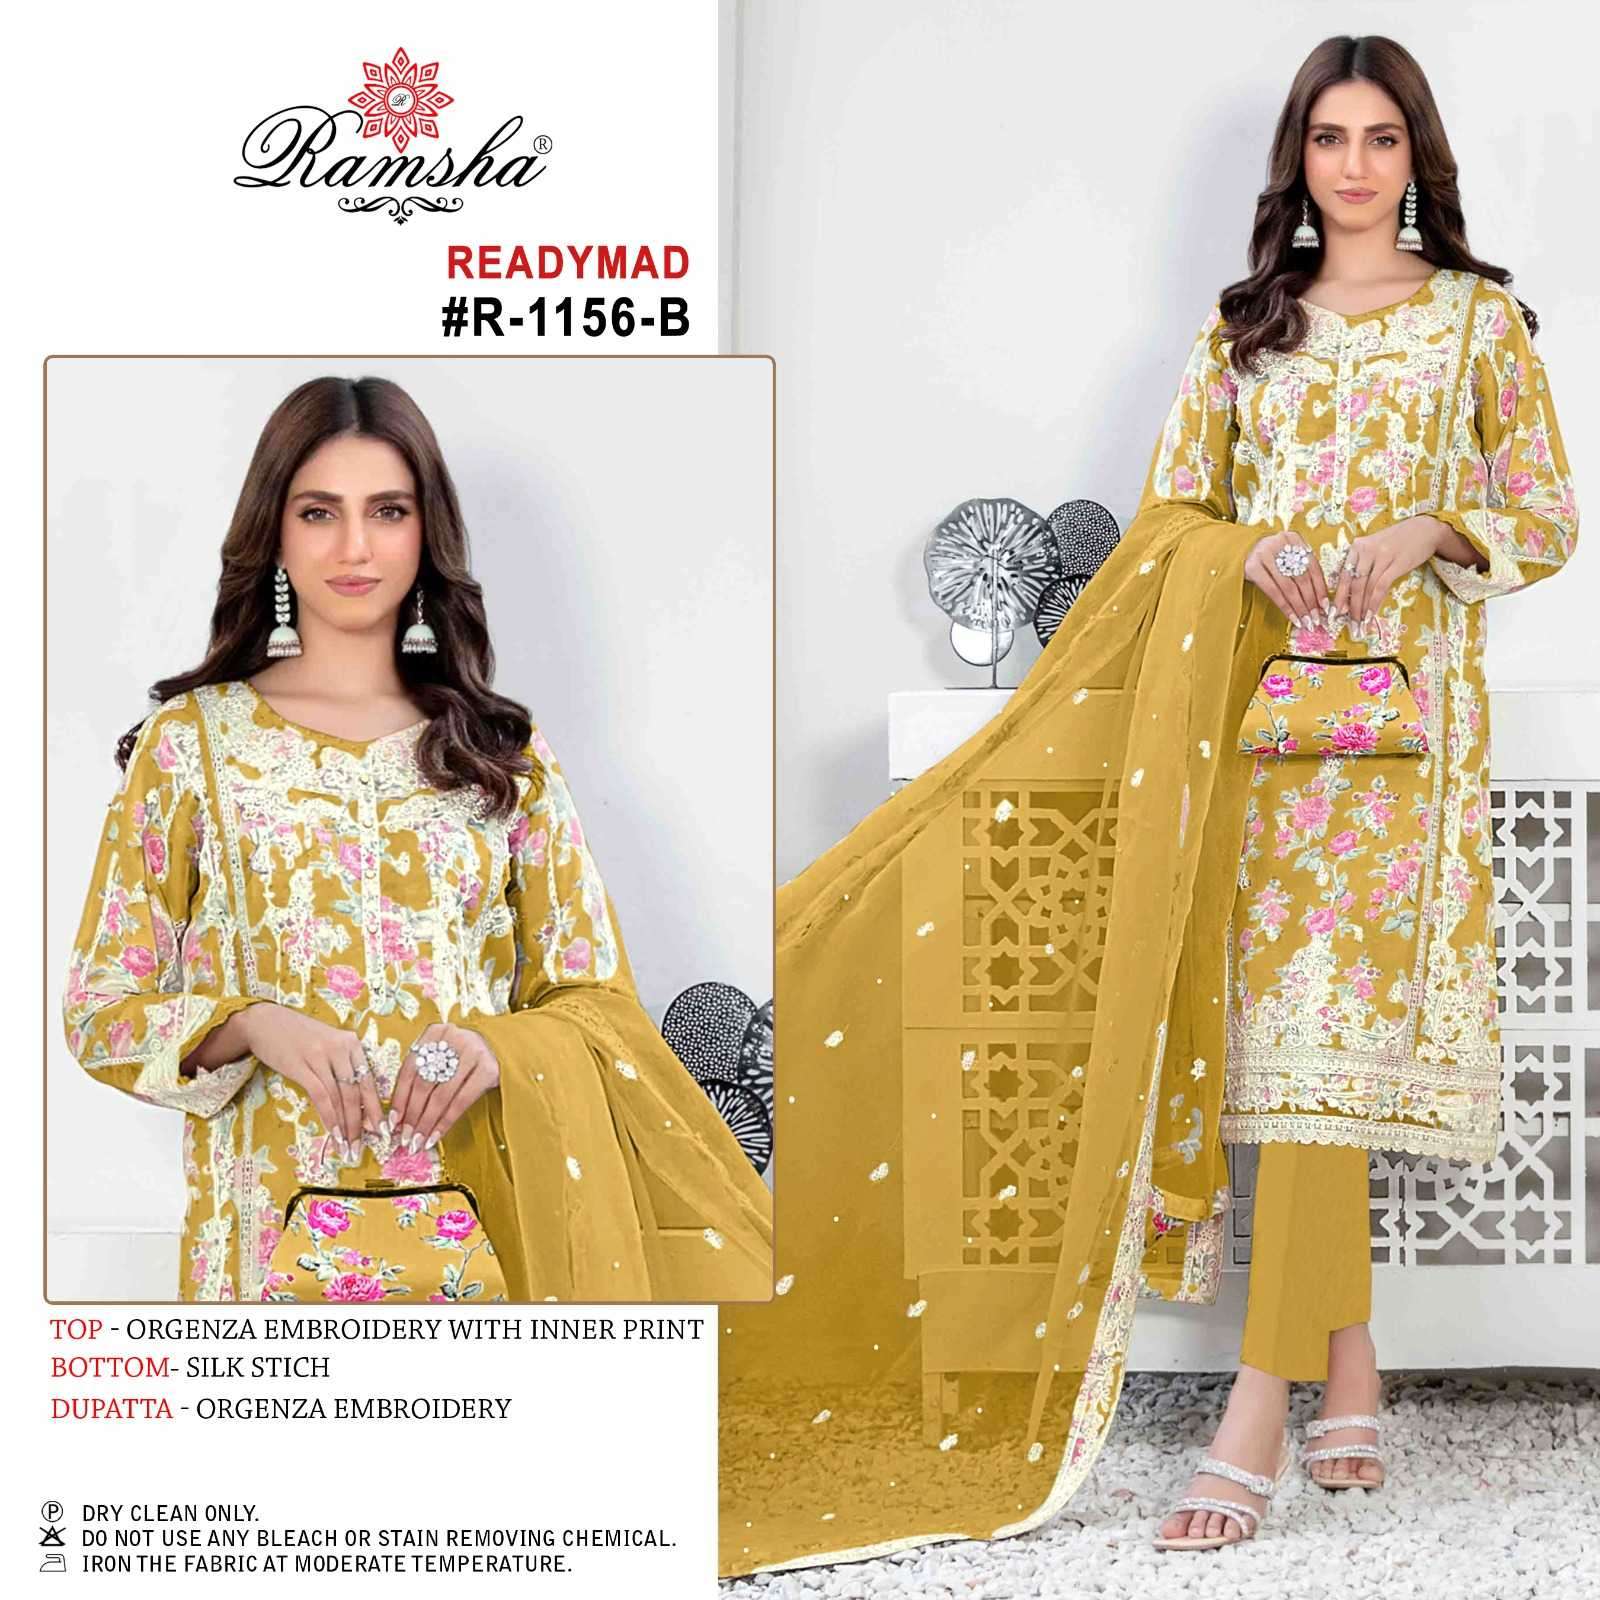 ramsha R-1156 organza embroidery readymade suit